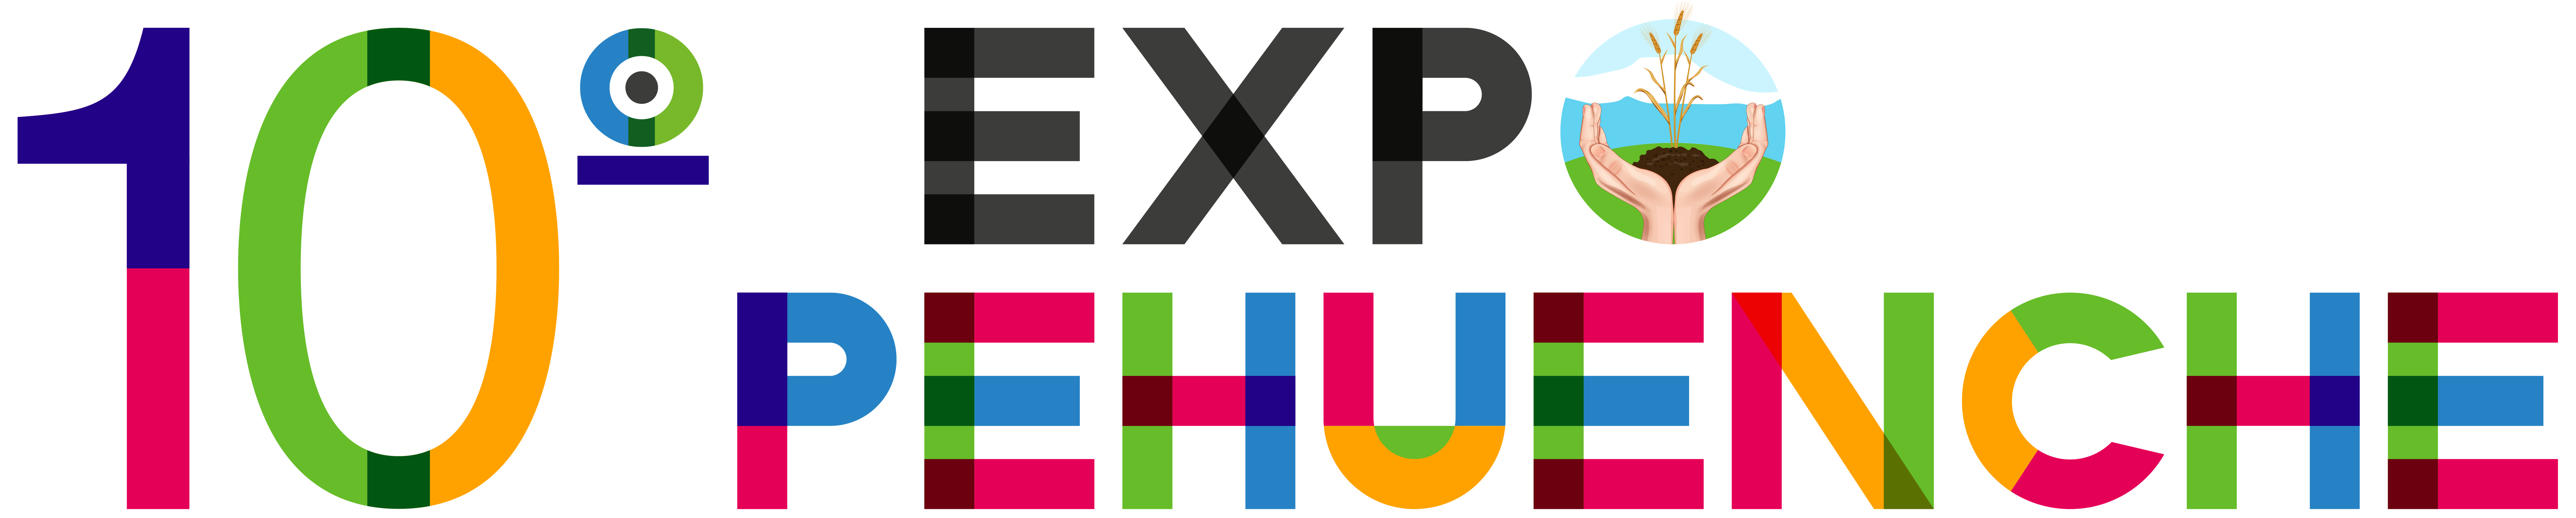 Bases Expo-Pehuenche 2023